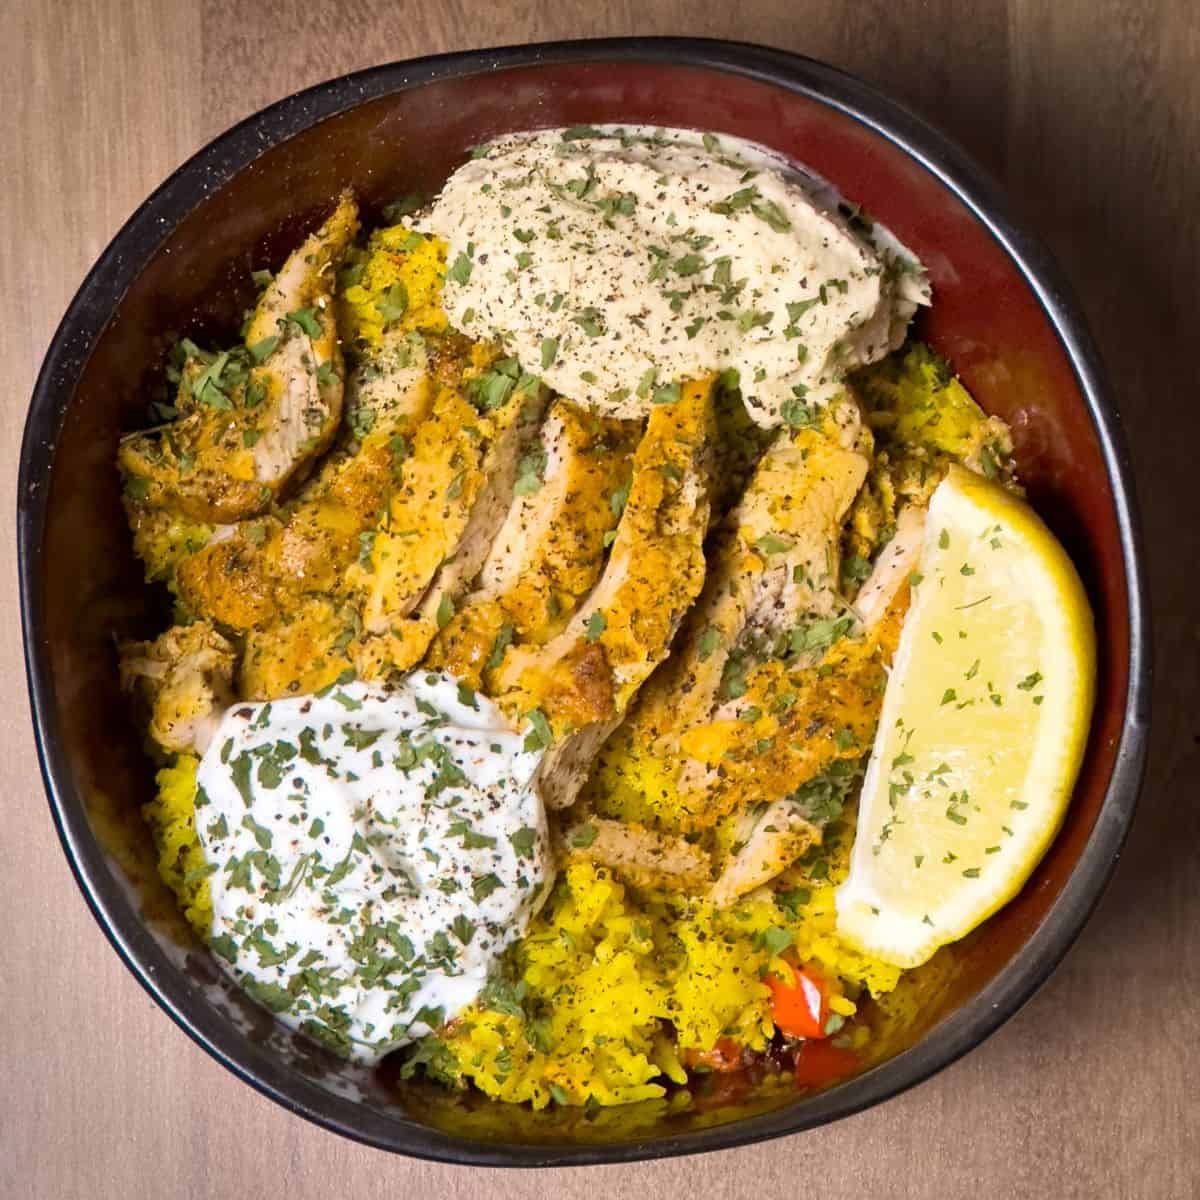 A hearty bowl filled with succulent slices of Chicken Shawarma, nestled on golden Saffron Rice, and topped with a dollop of Tzatziki sauce, accompanied by a fresh lemon wedge.